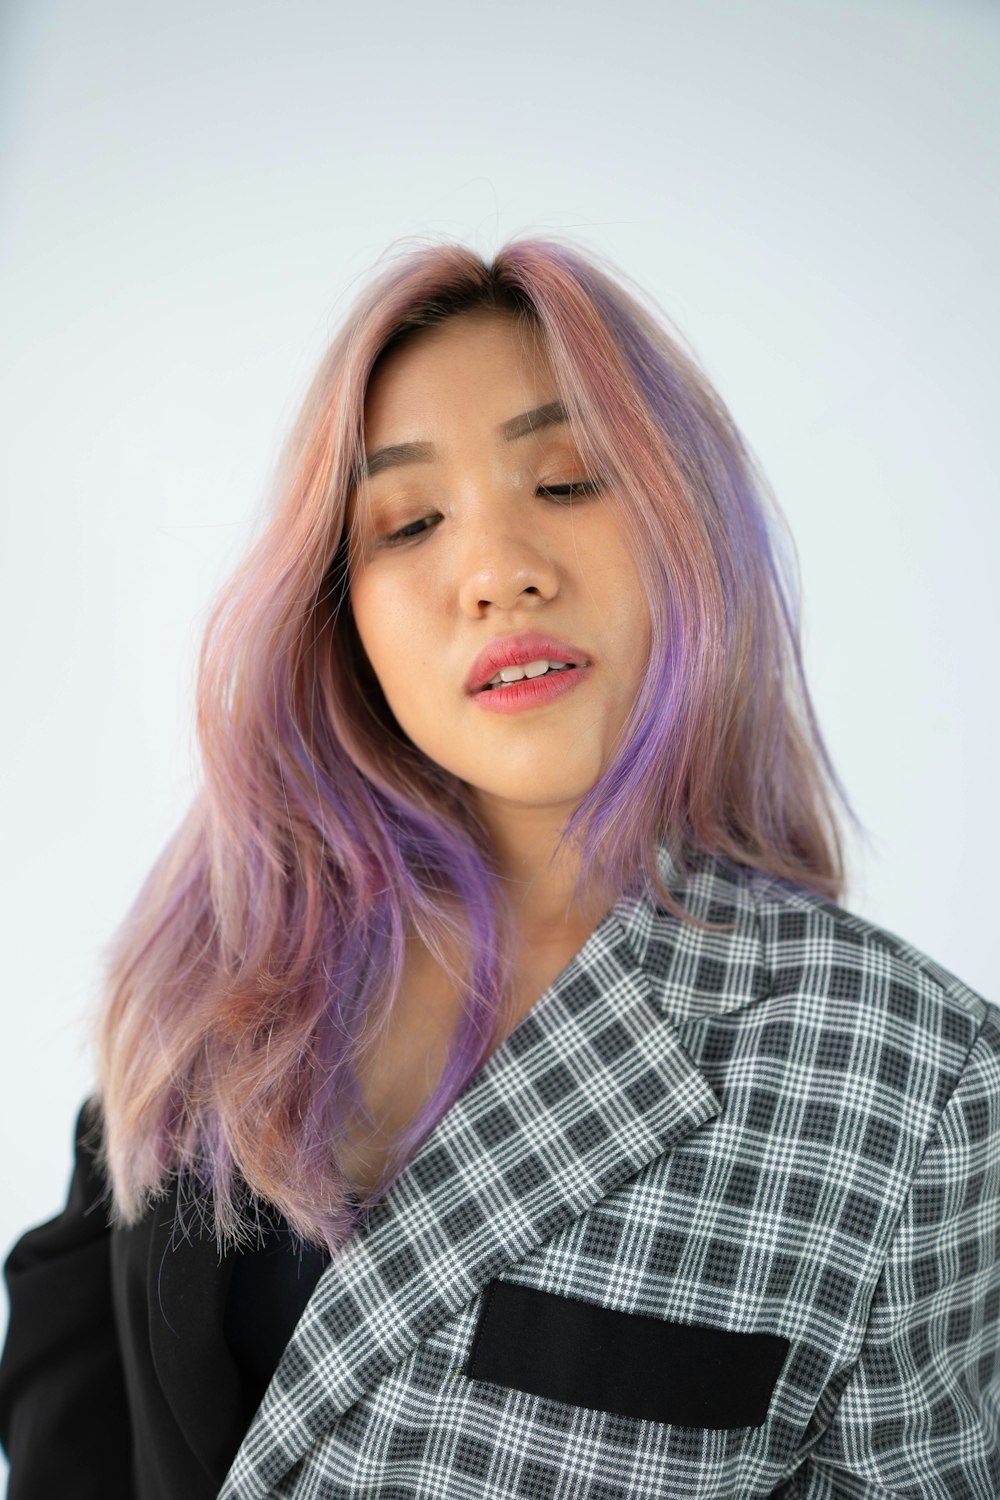 a woman with pink hair wearing a black and white checkered shirt